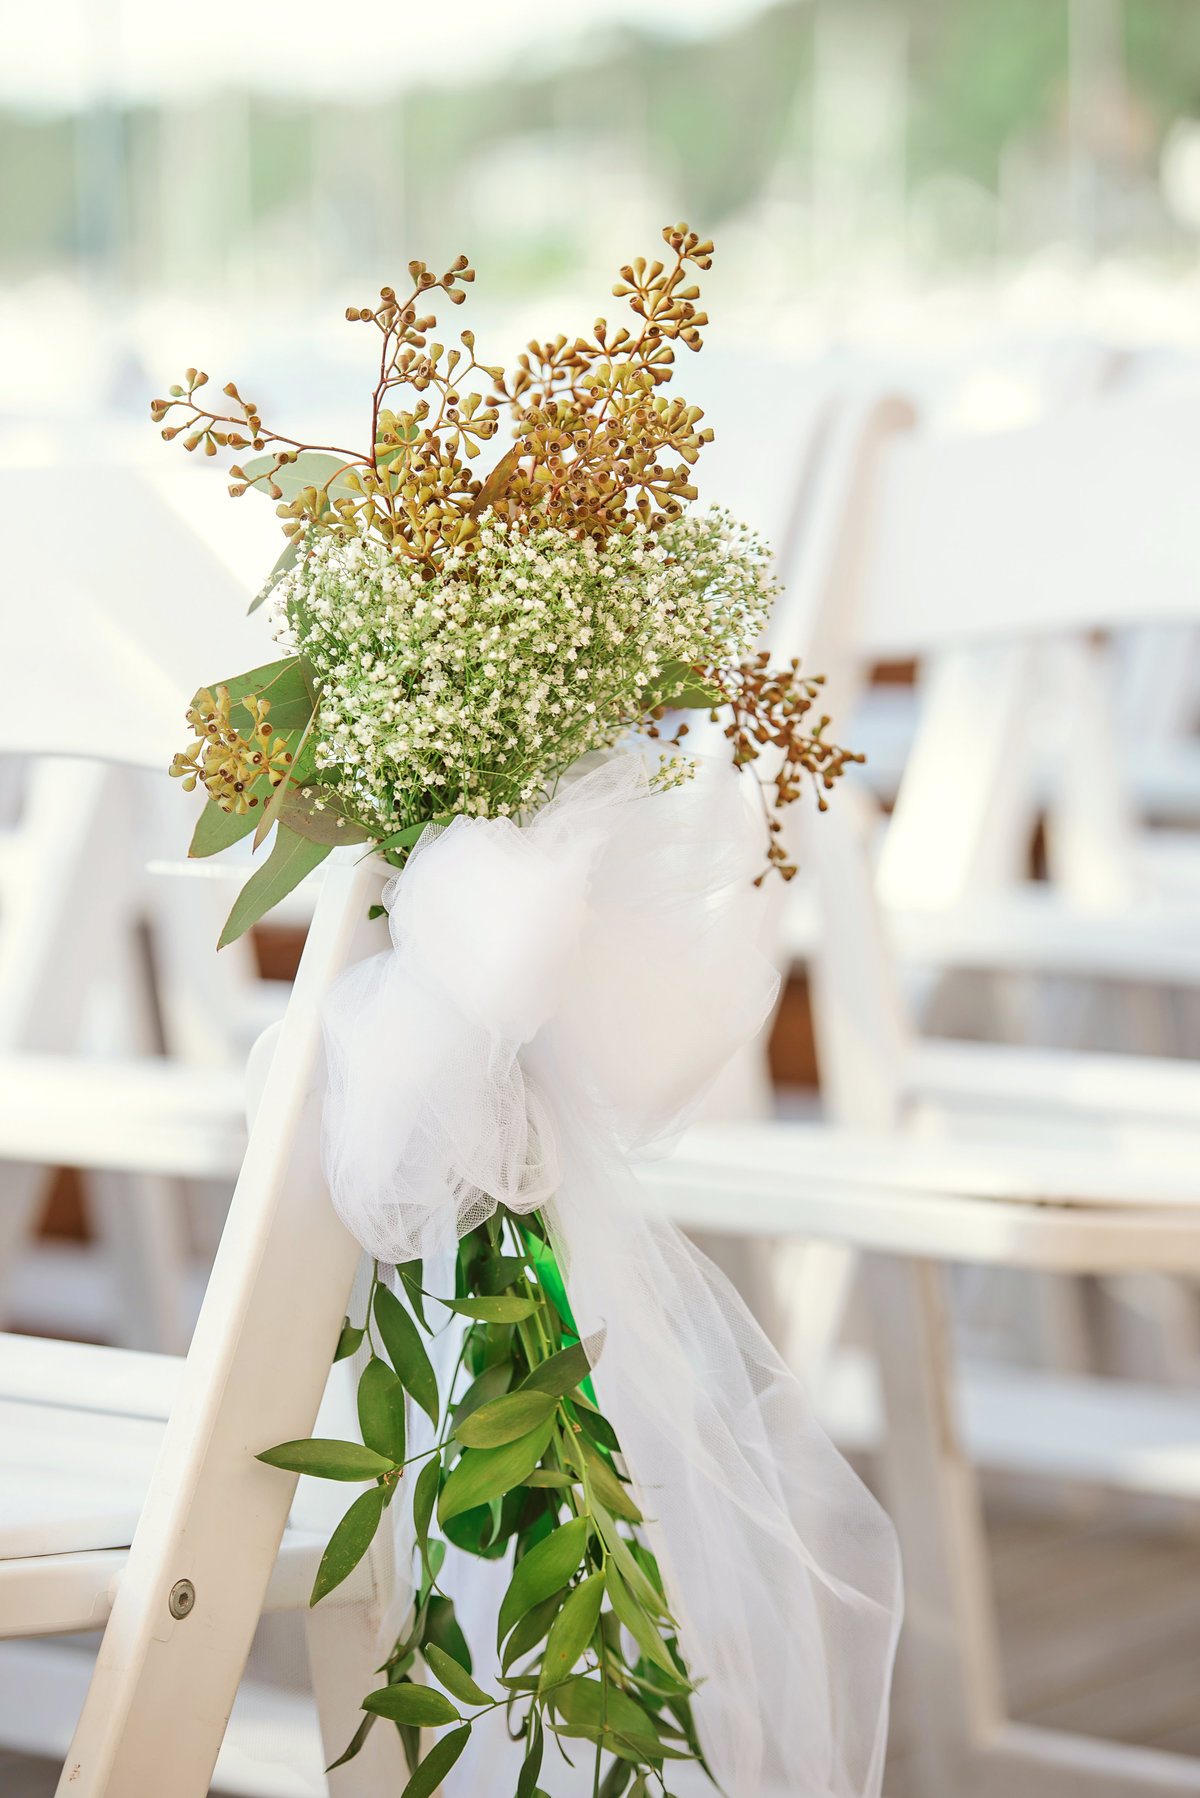 Baby breath flowers placed on chairs for wedding ceremony